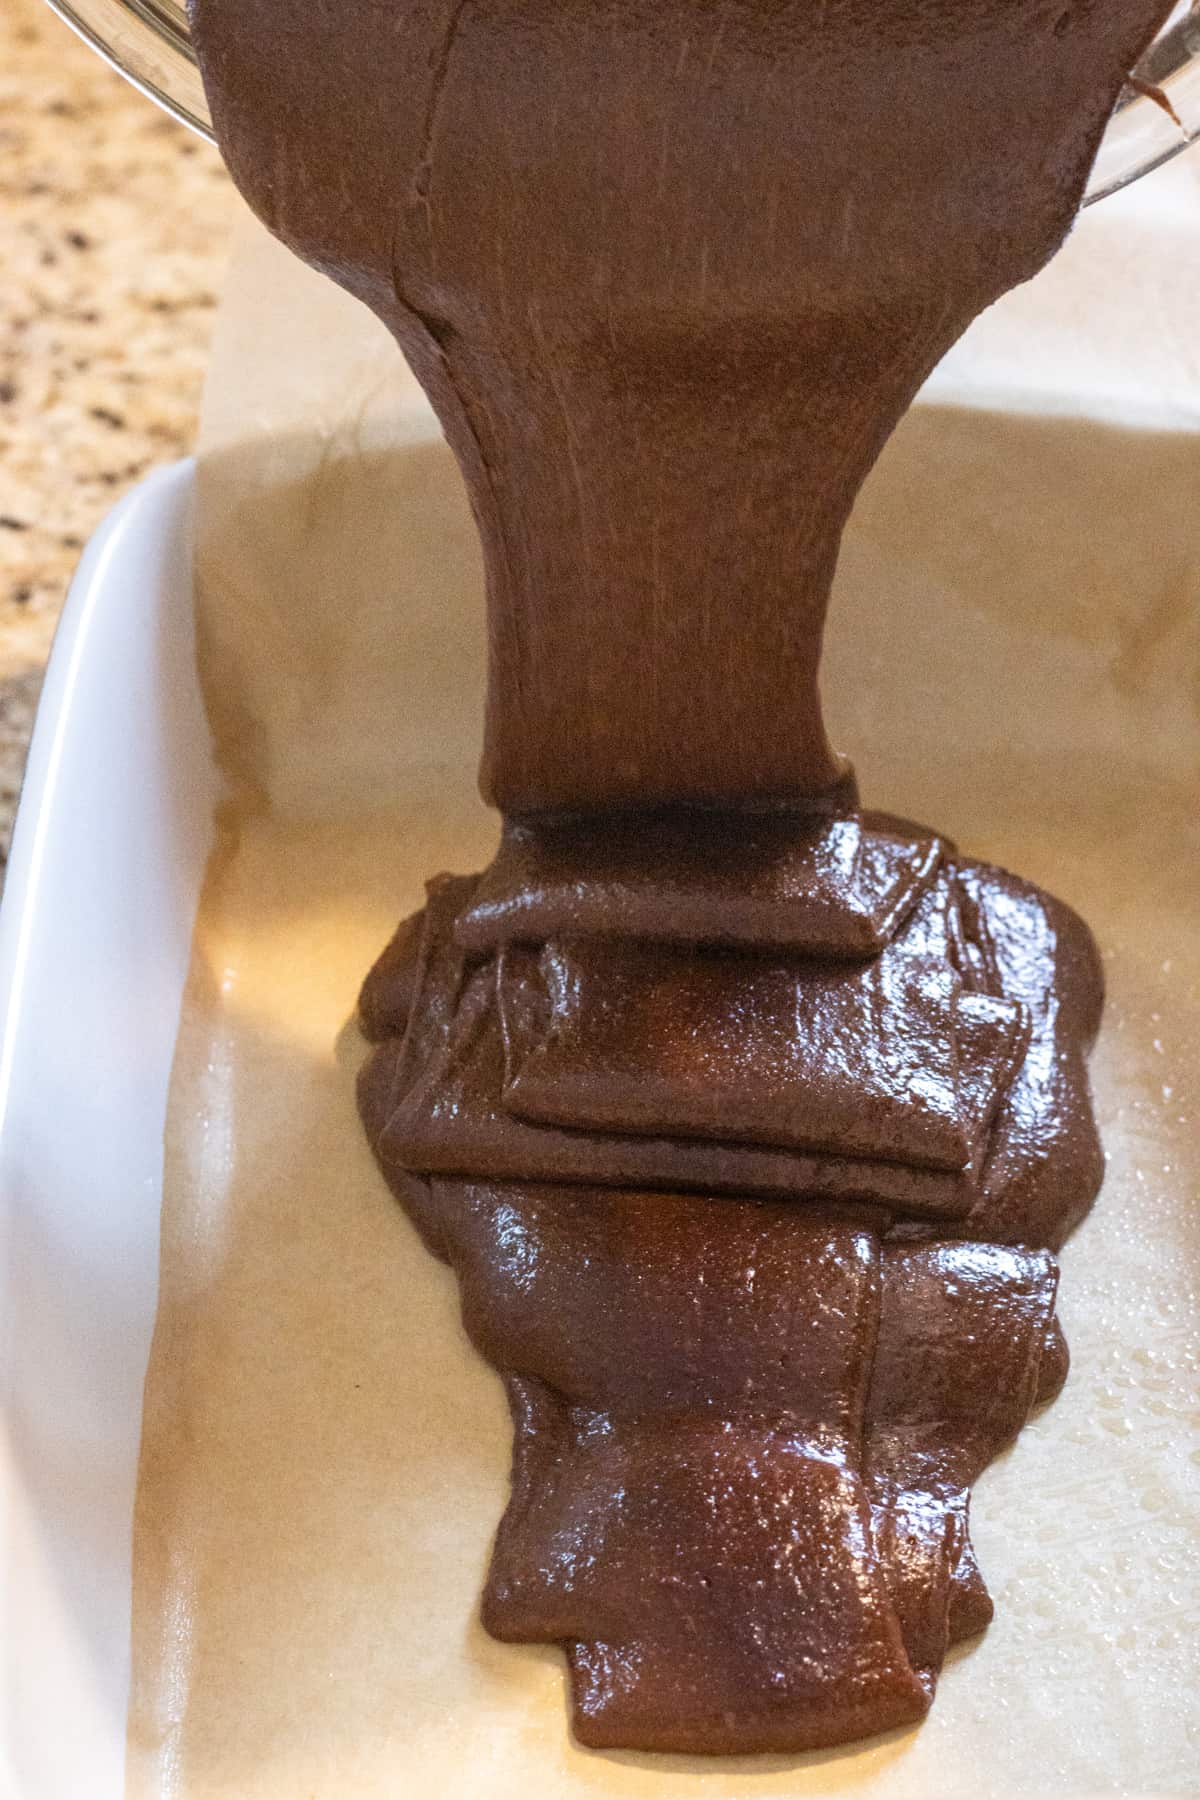 Espresso brownie batter being poured into a parchment lined baking dish.